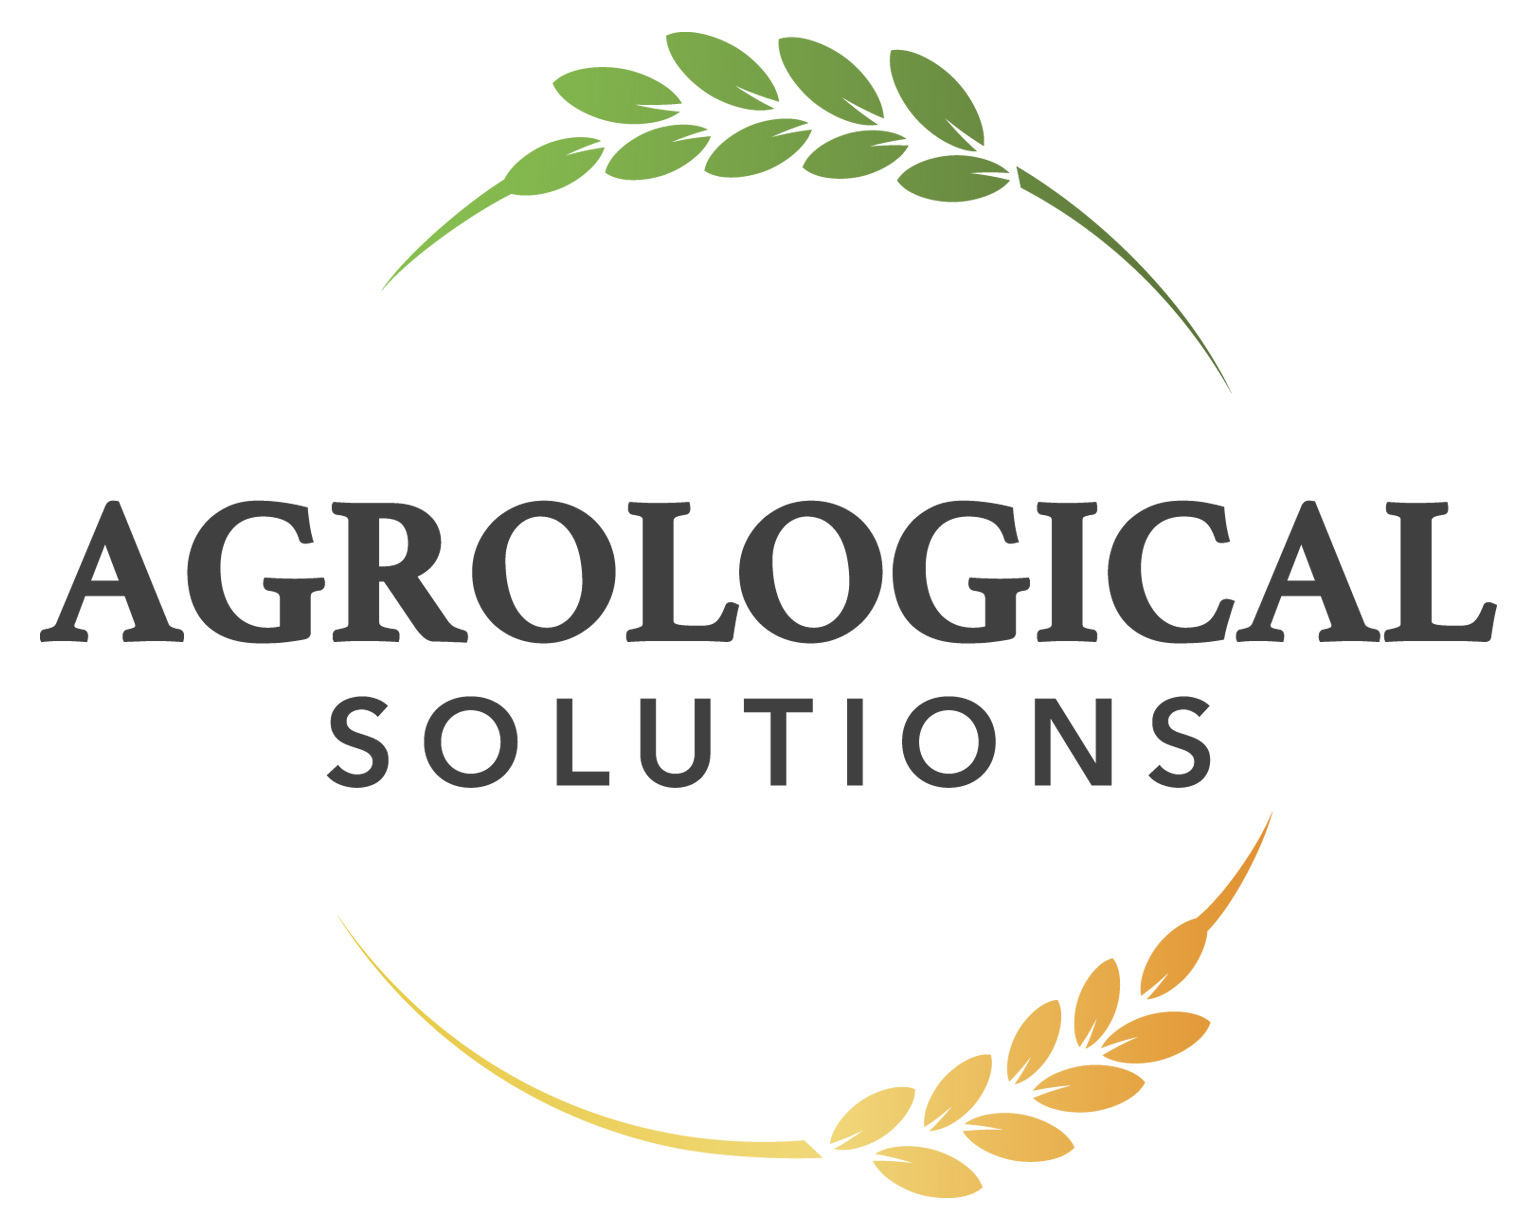 Agrological Solutions